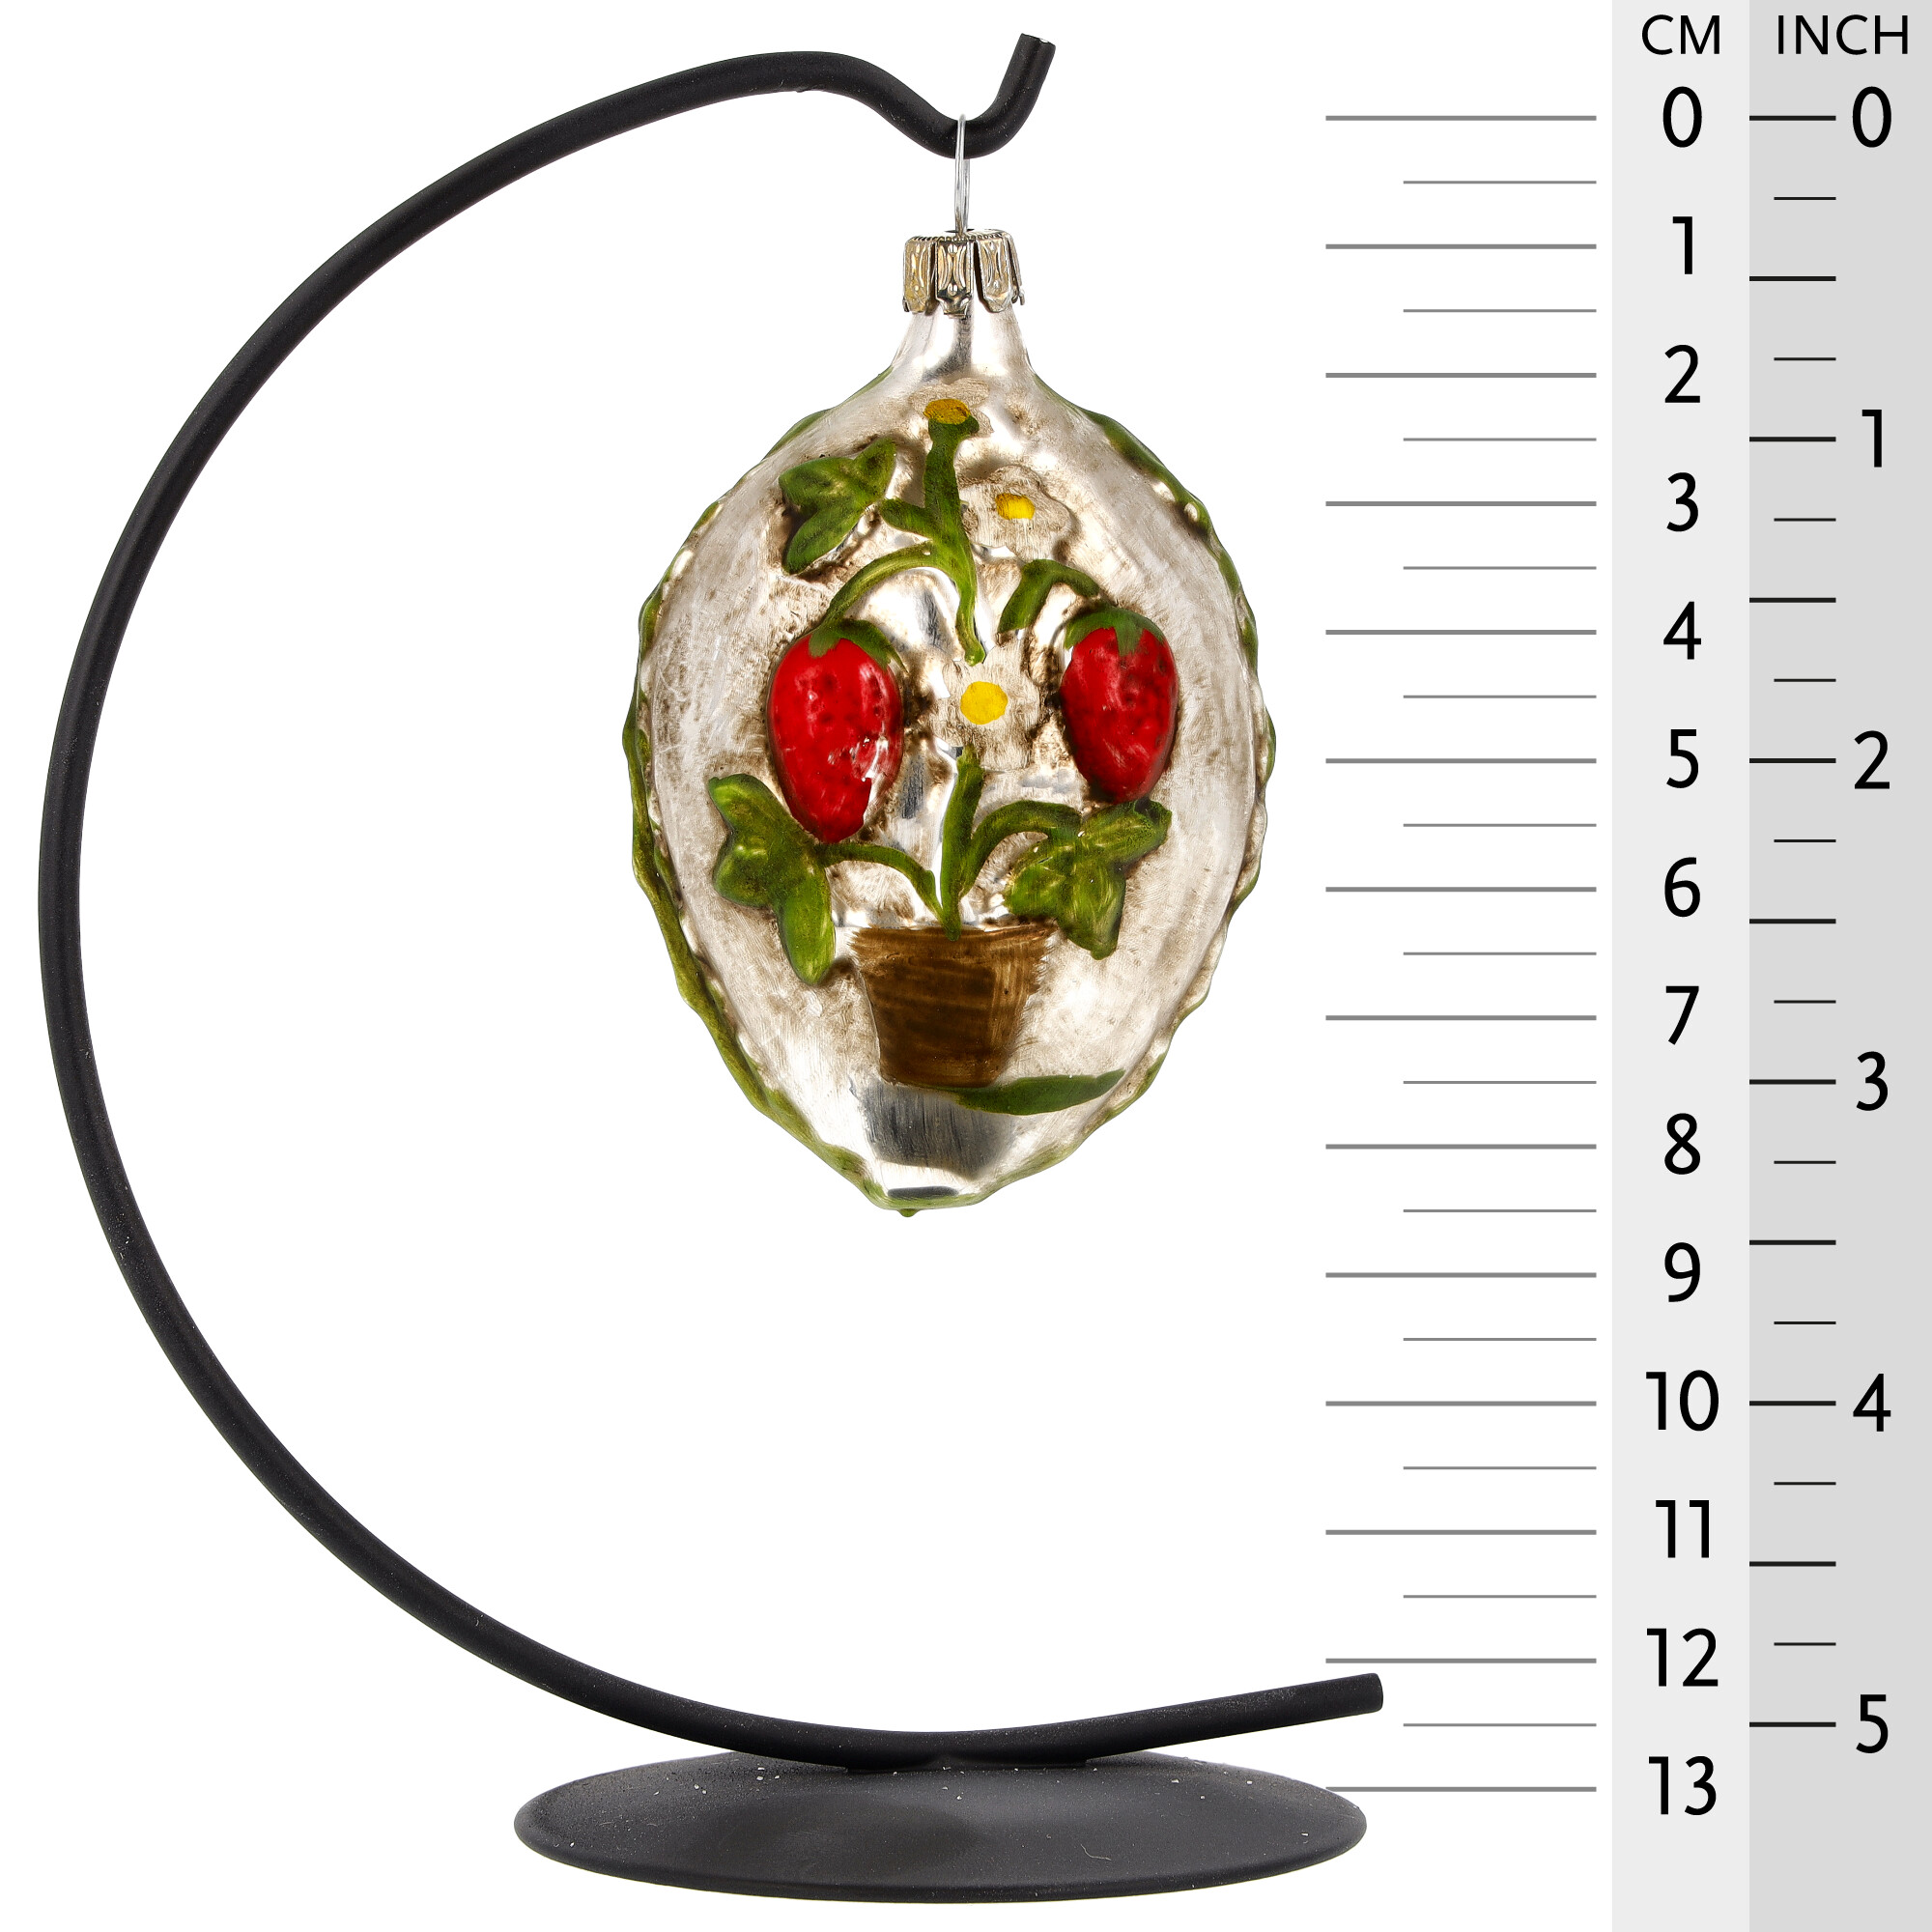 Retro Vintage style Christmas Glass Ornament - Egg with flowerpot and strawberries